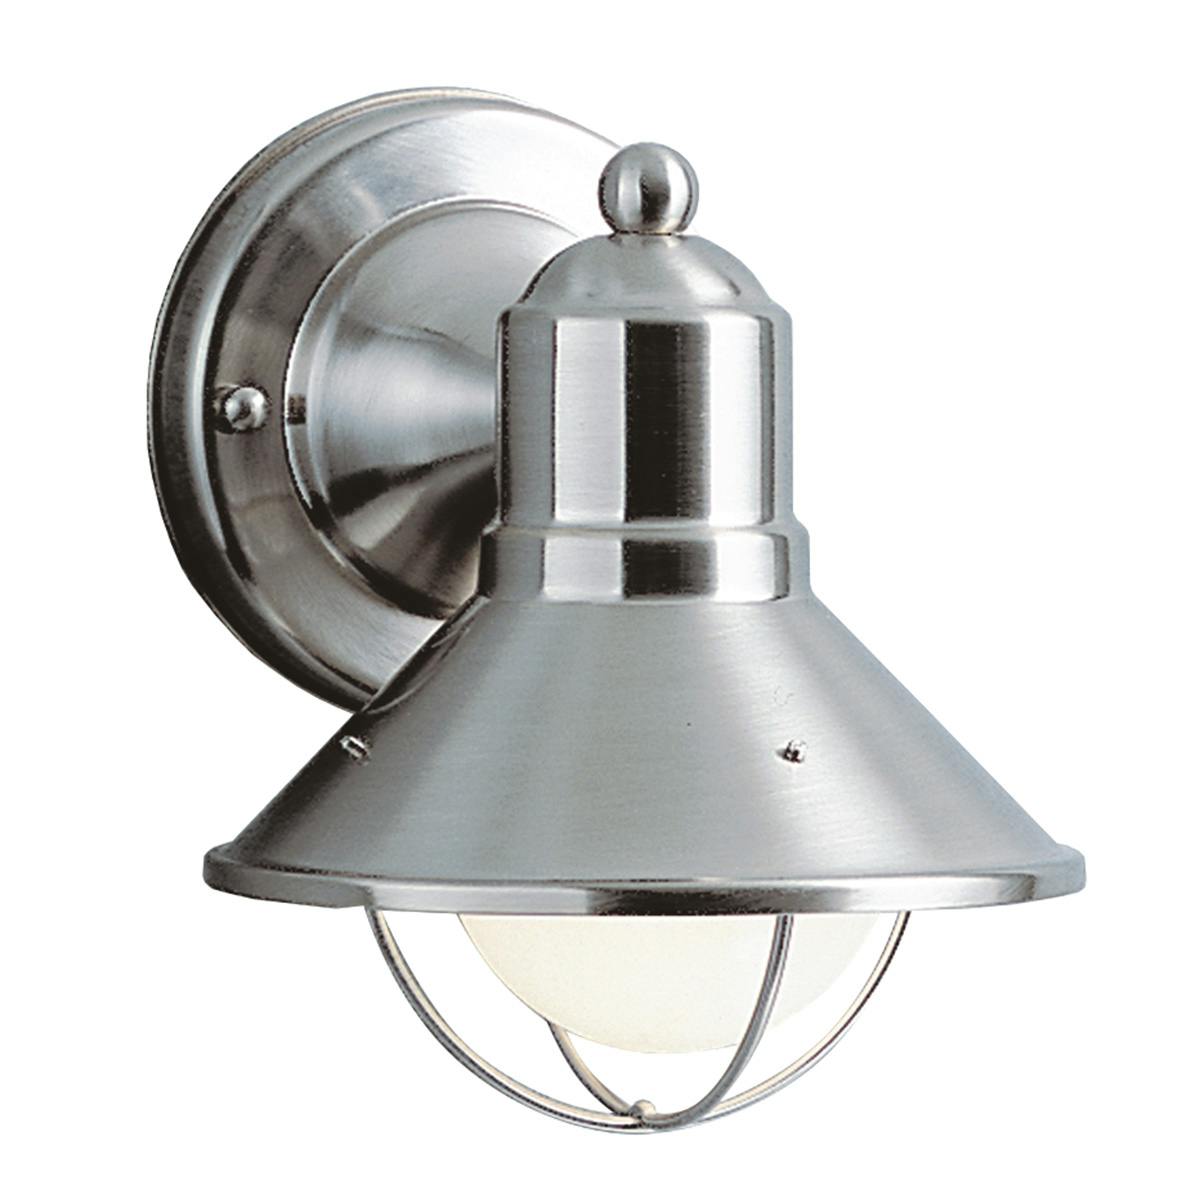 Product image for Seaside outdoor wall light 9021NI